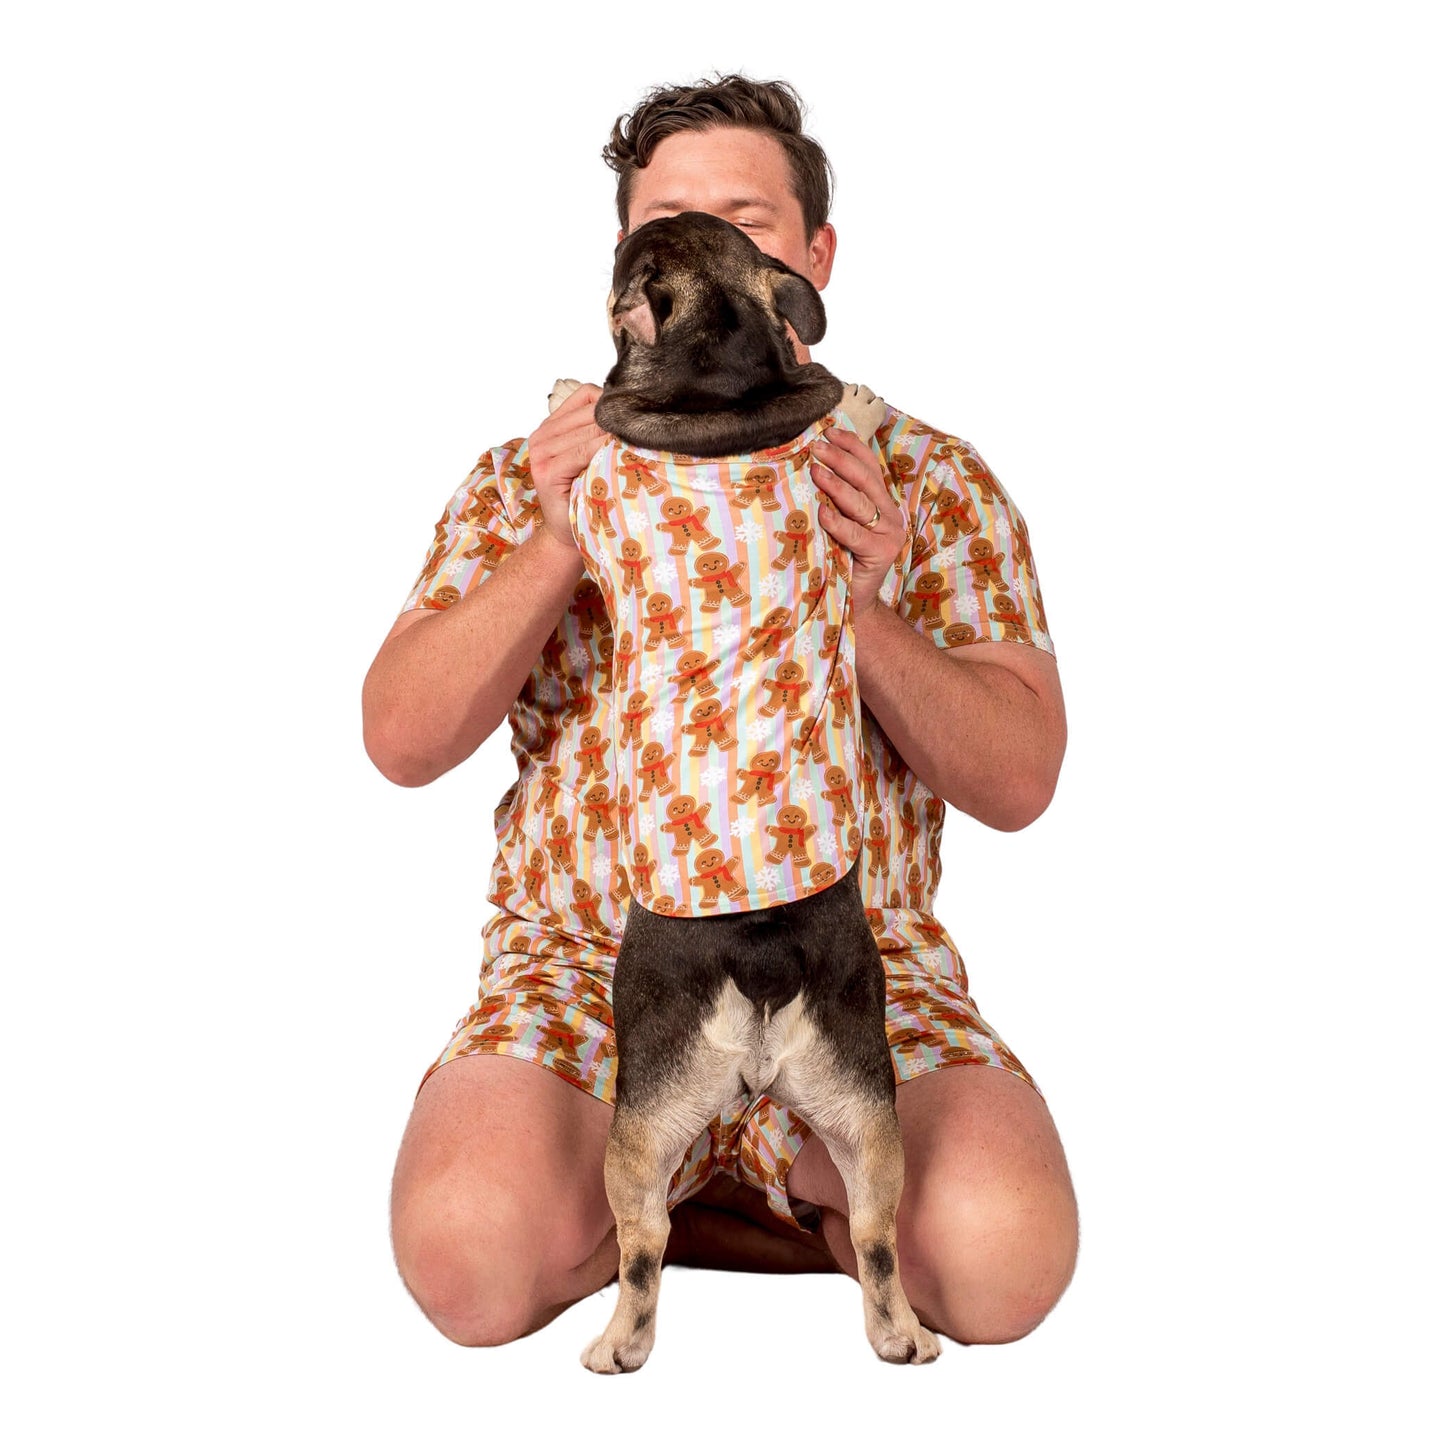 A French Bulldog stganding on Hind legs cuddling his dad. They are wearing GIngerbread Cheer matching pyjamas.